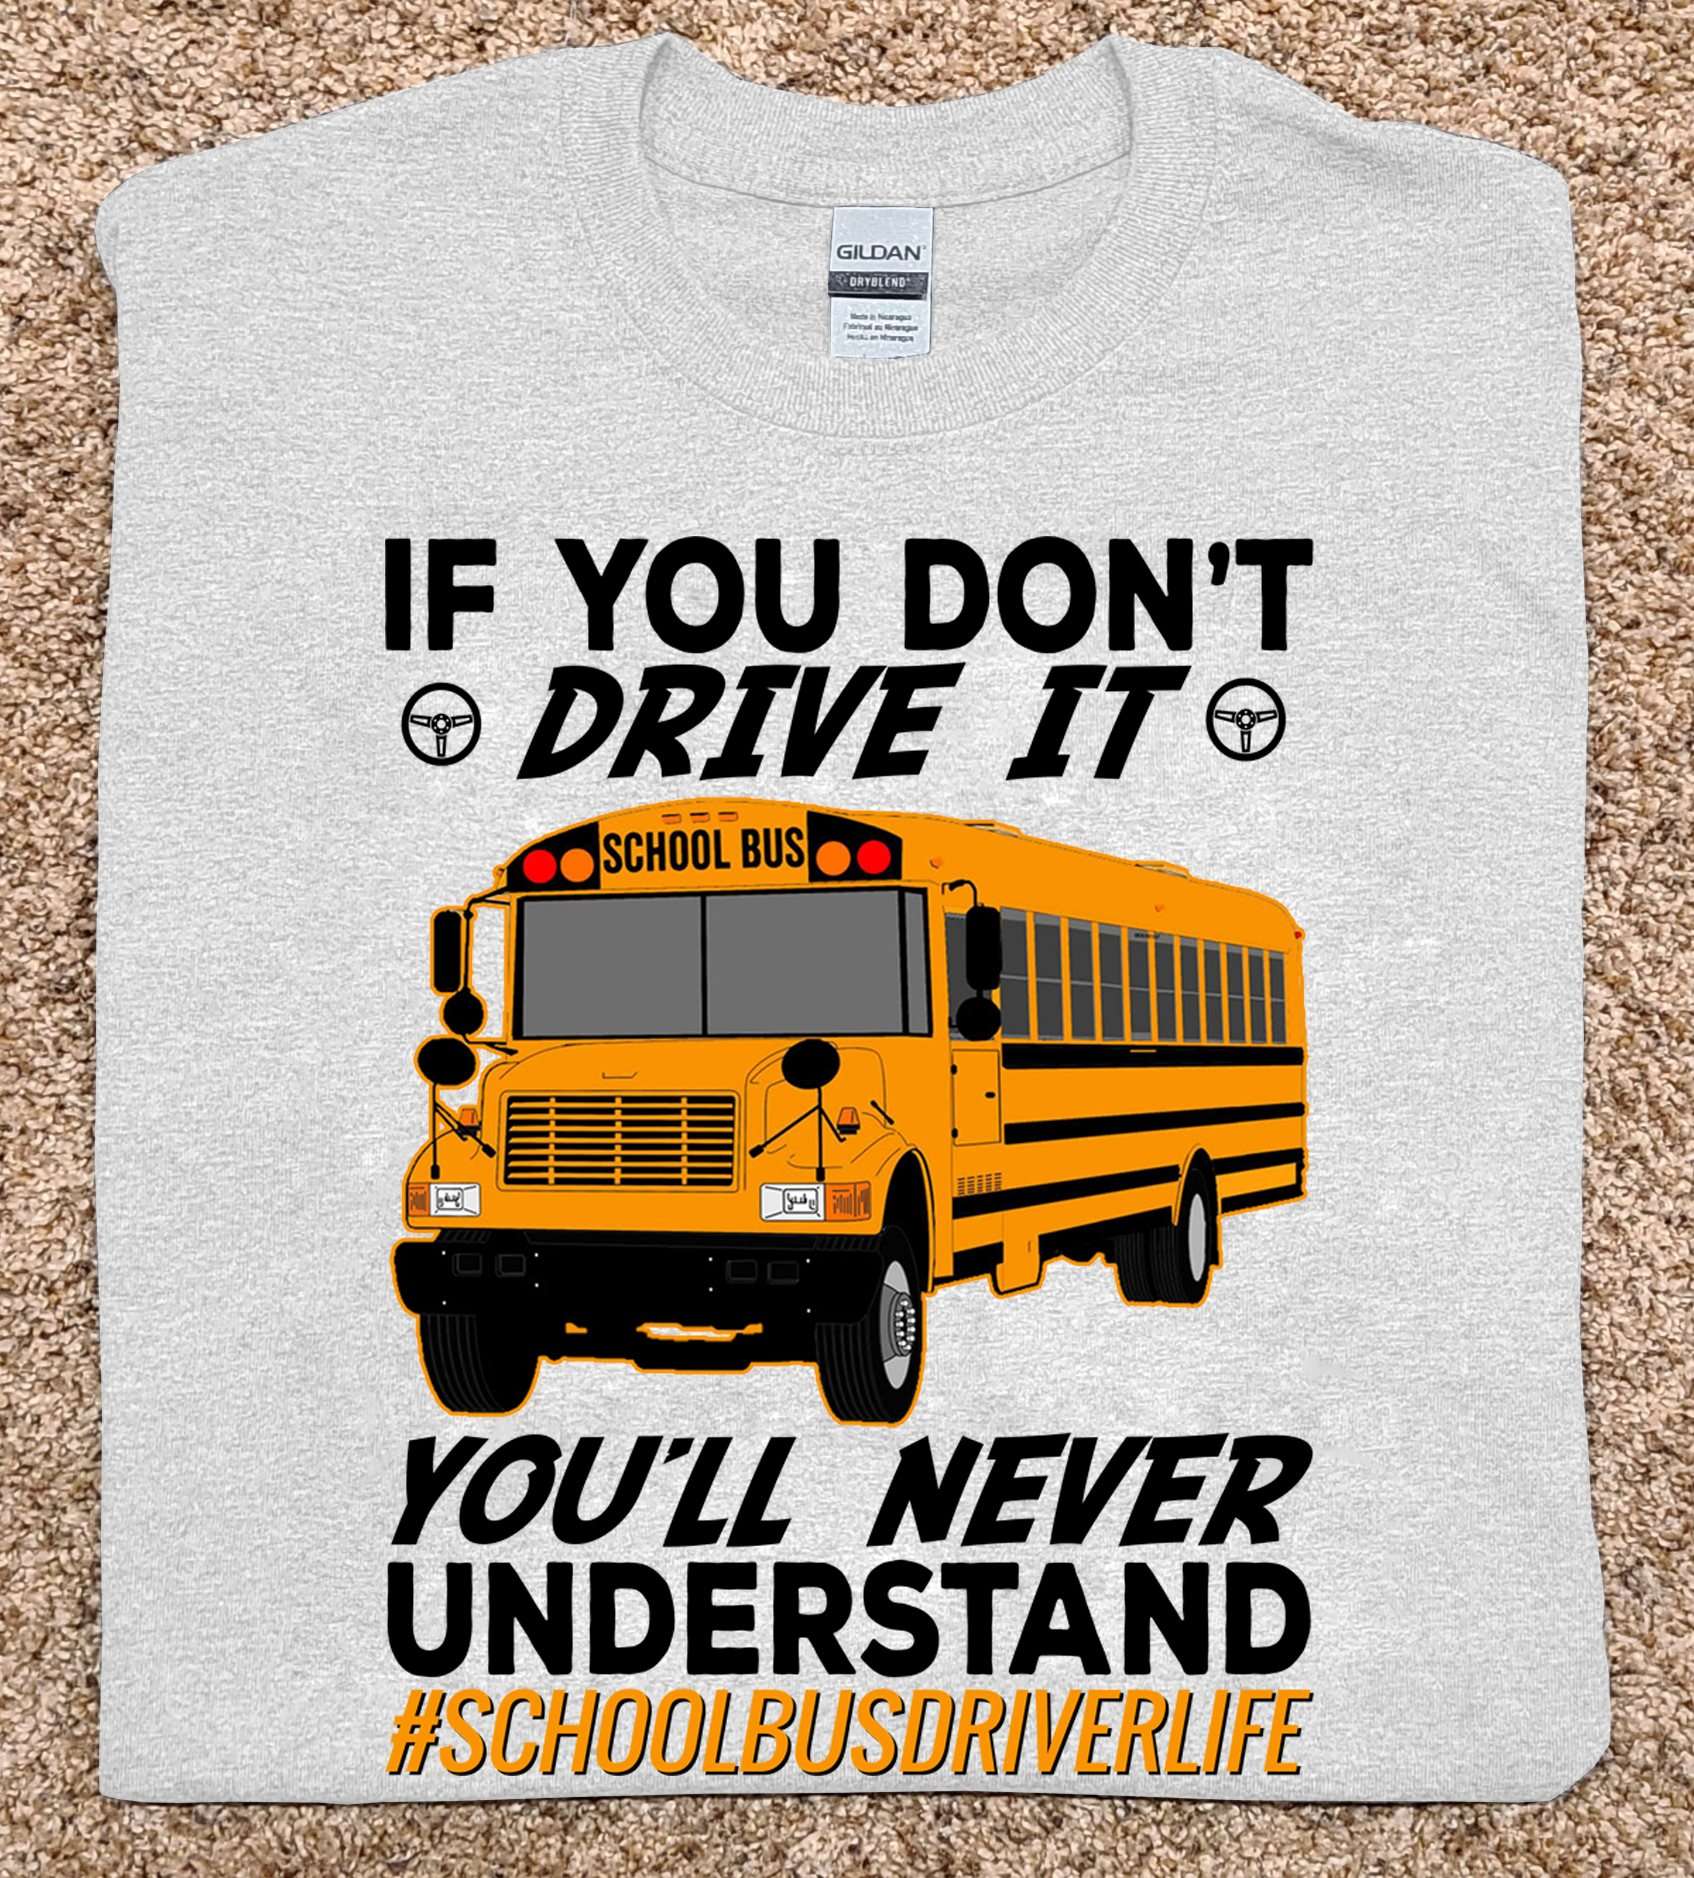 If you don't drive it you'll never understand - School bus driver life, bus driver job